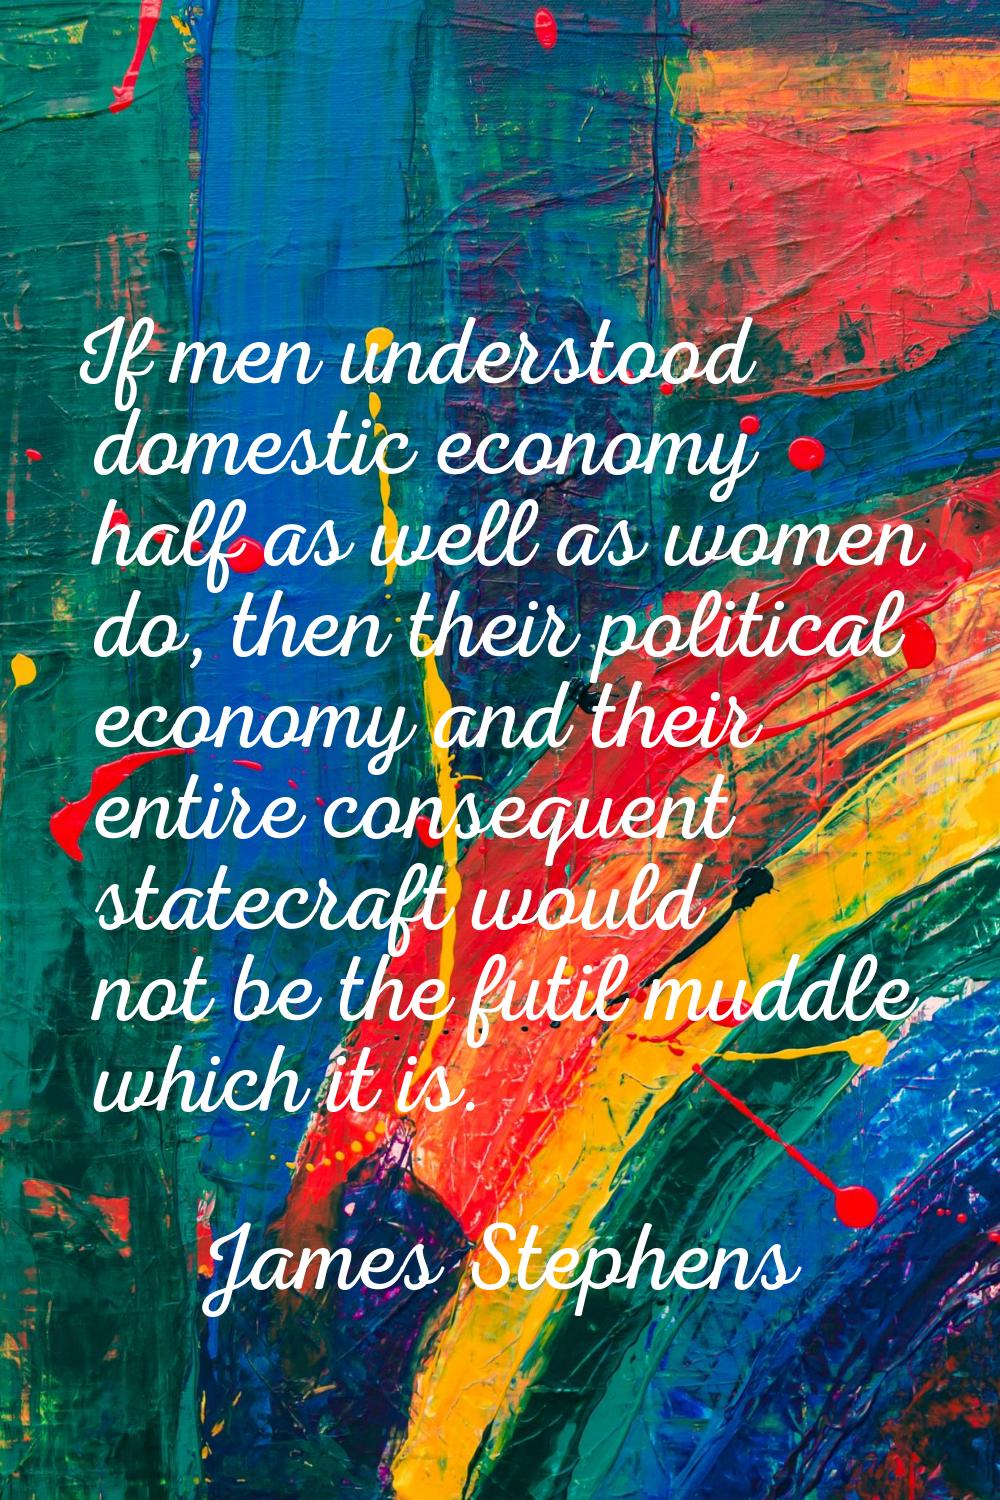 If men understood domestic economy half as well as women do, then their political economy and their